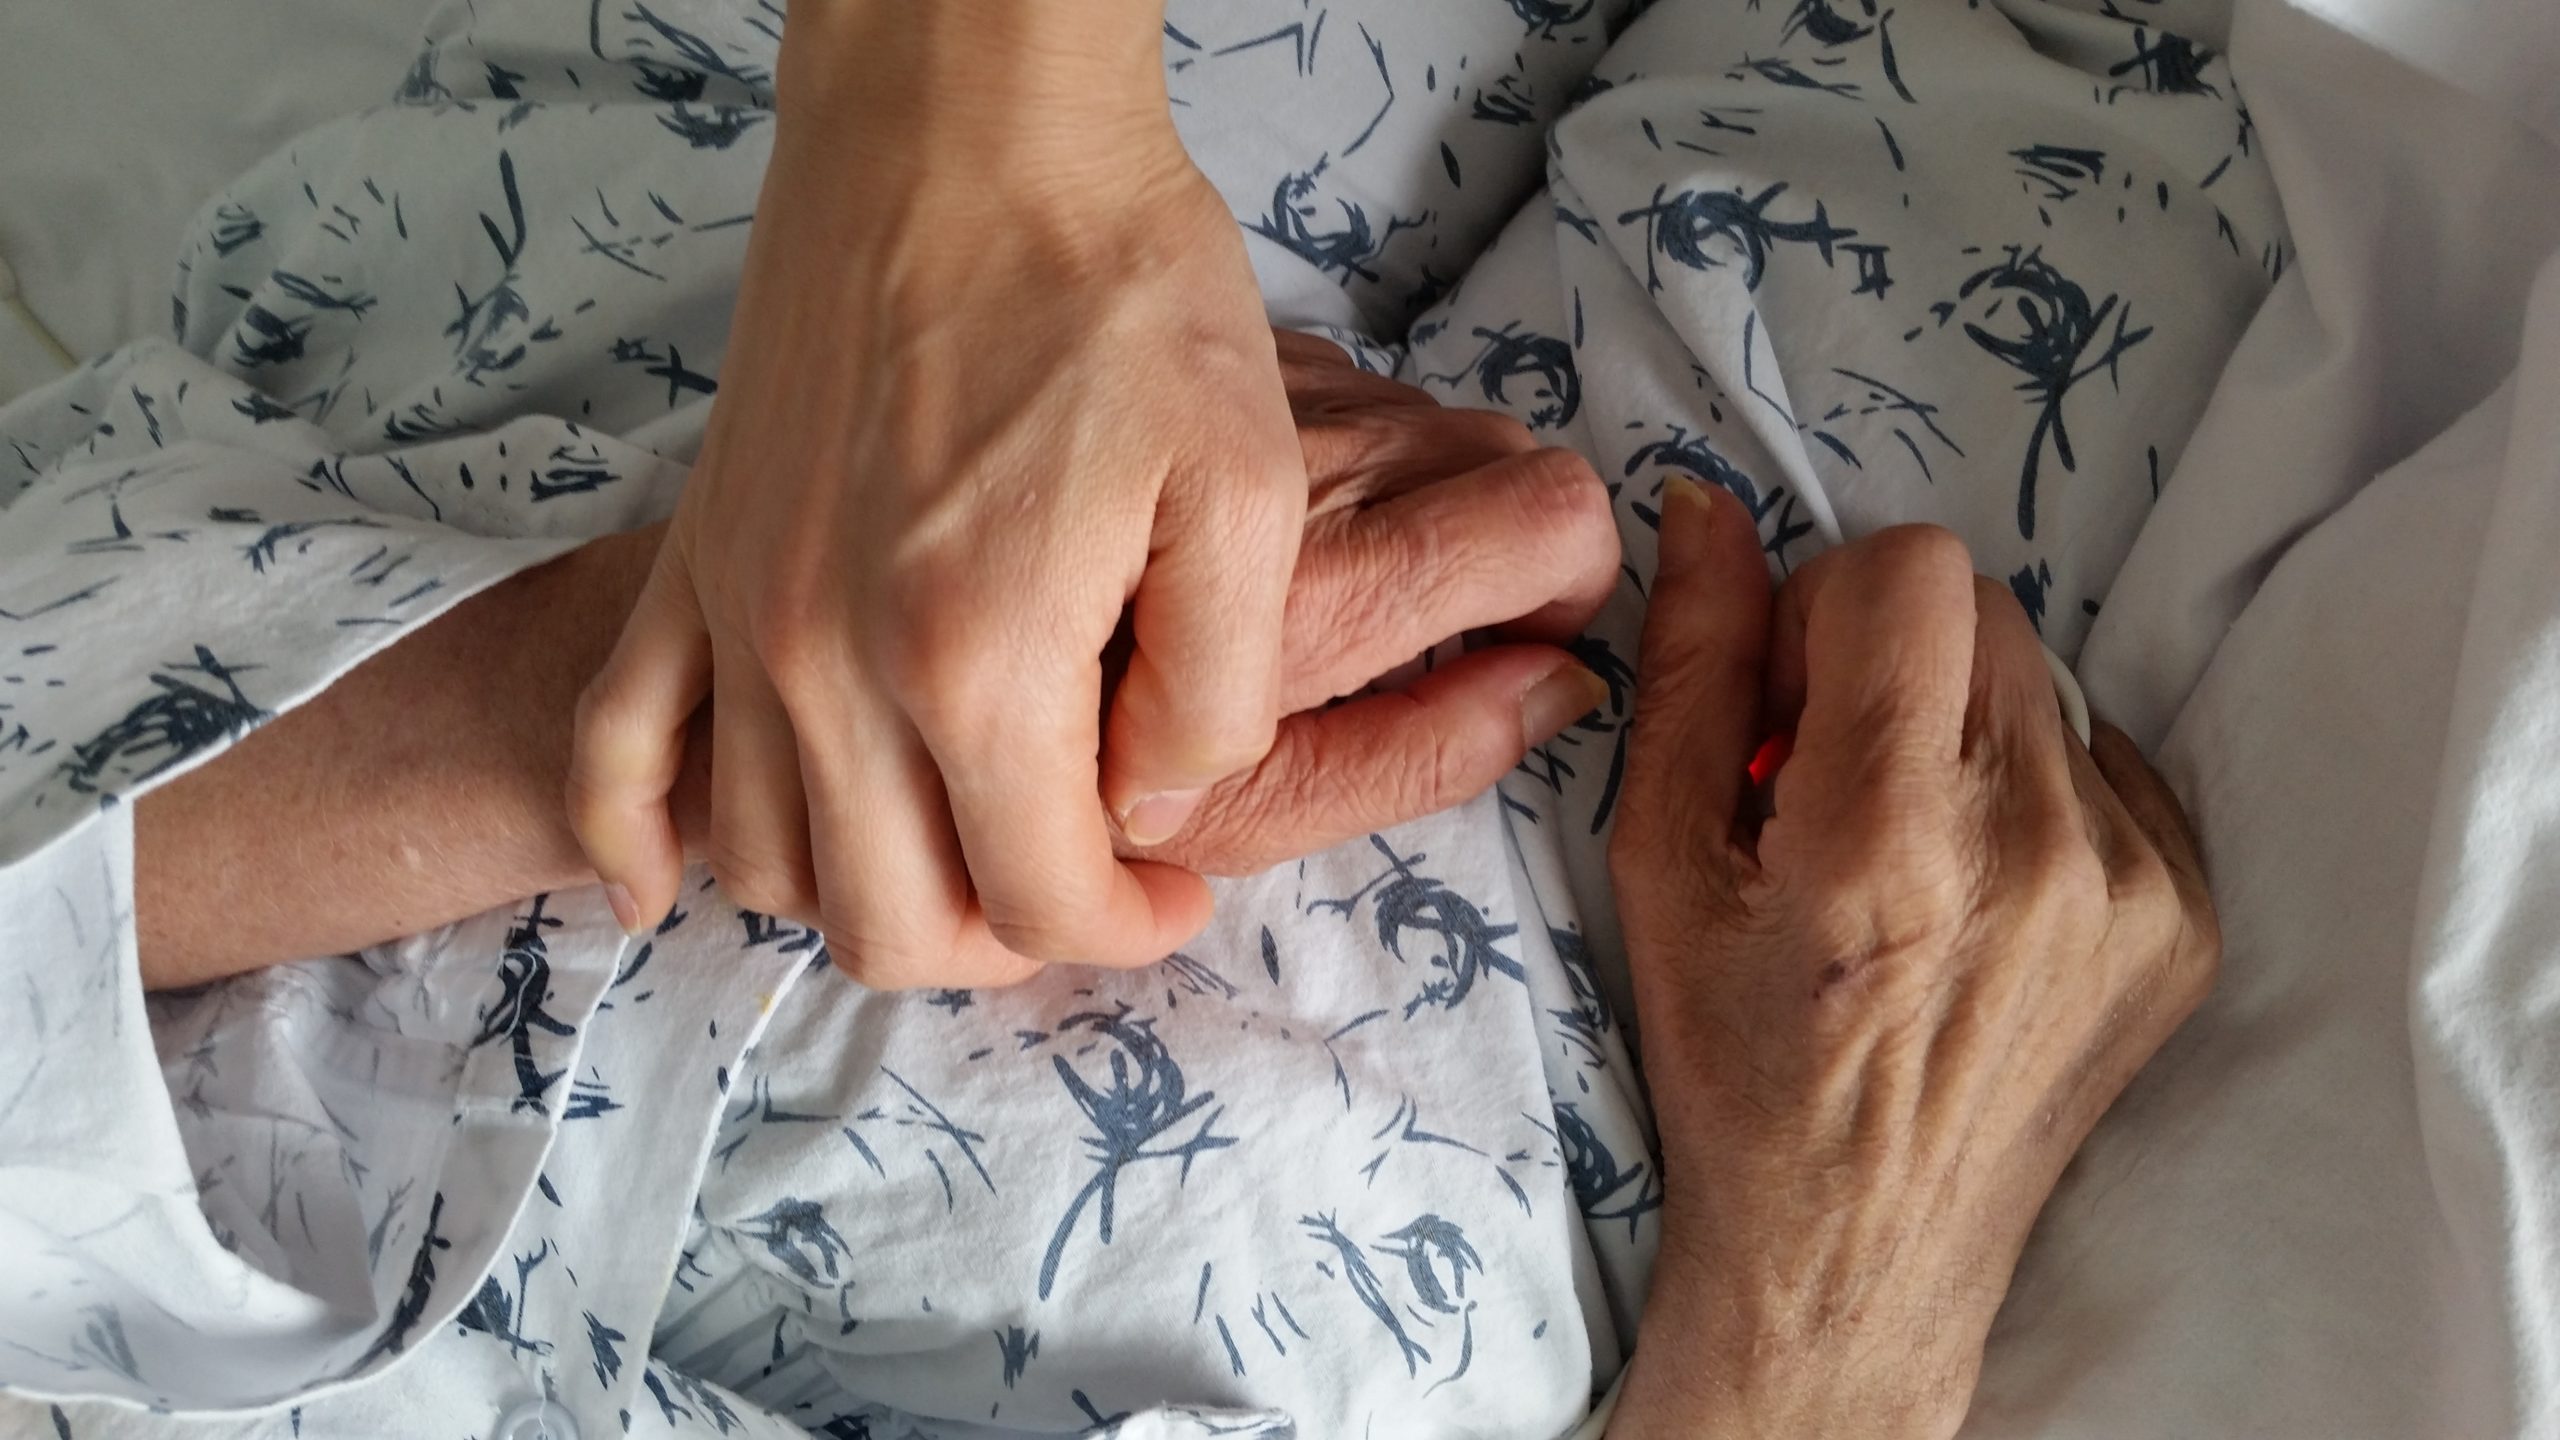 holding-elderly-family-members-hand-in-hospital-during-end-of-life-care_t20_roJeLd